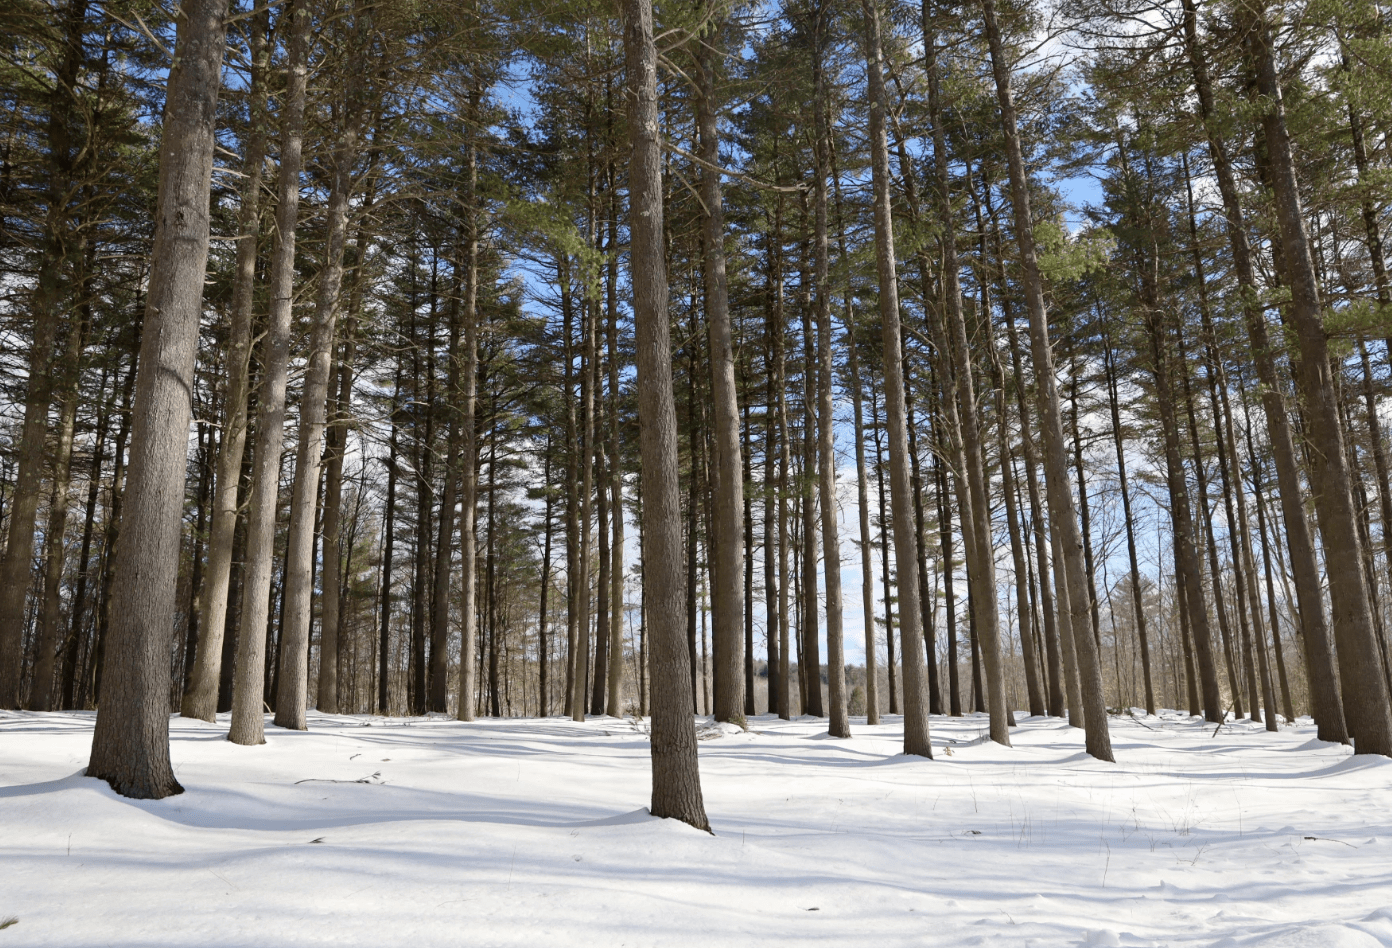 A view of the burial grounds at the Baldwin Hill Conservation Cemetery. So far, six people have been buried in this area below the cathedral pine trees. In total, there 90 acres of conserved land, 10 of which are dedicated to green burials. The cemetery has room for 300 burials. (Esta Pratt-Kielley/Maine Public)